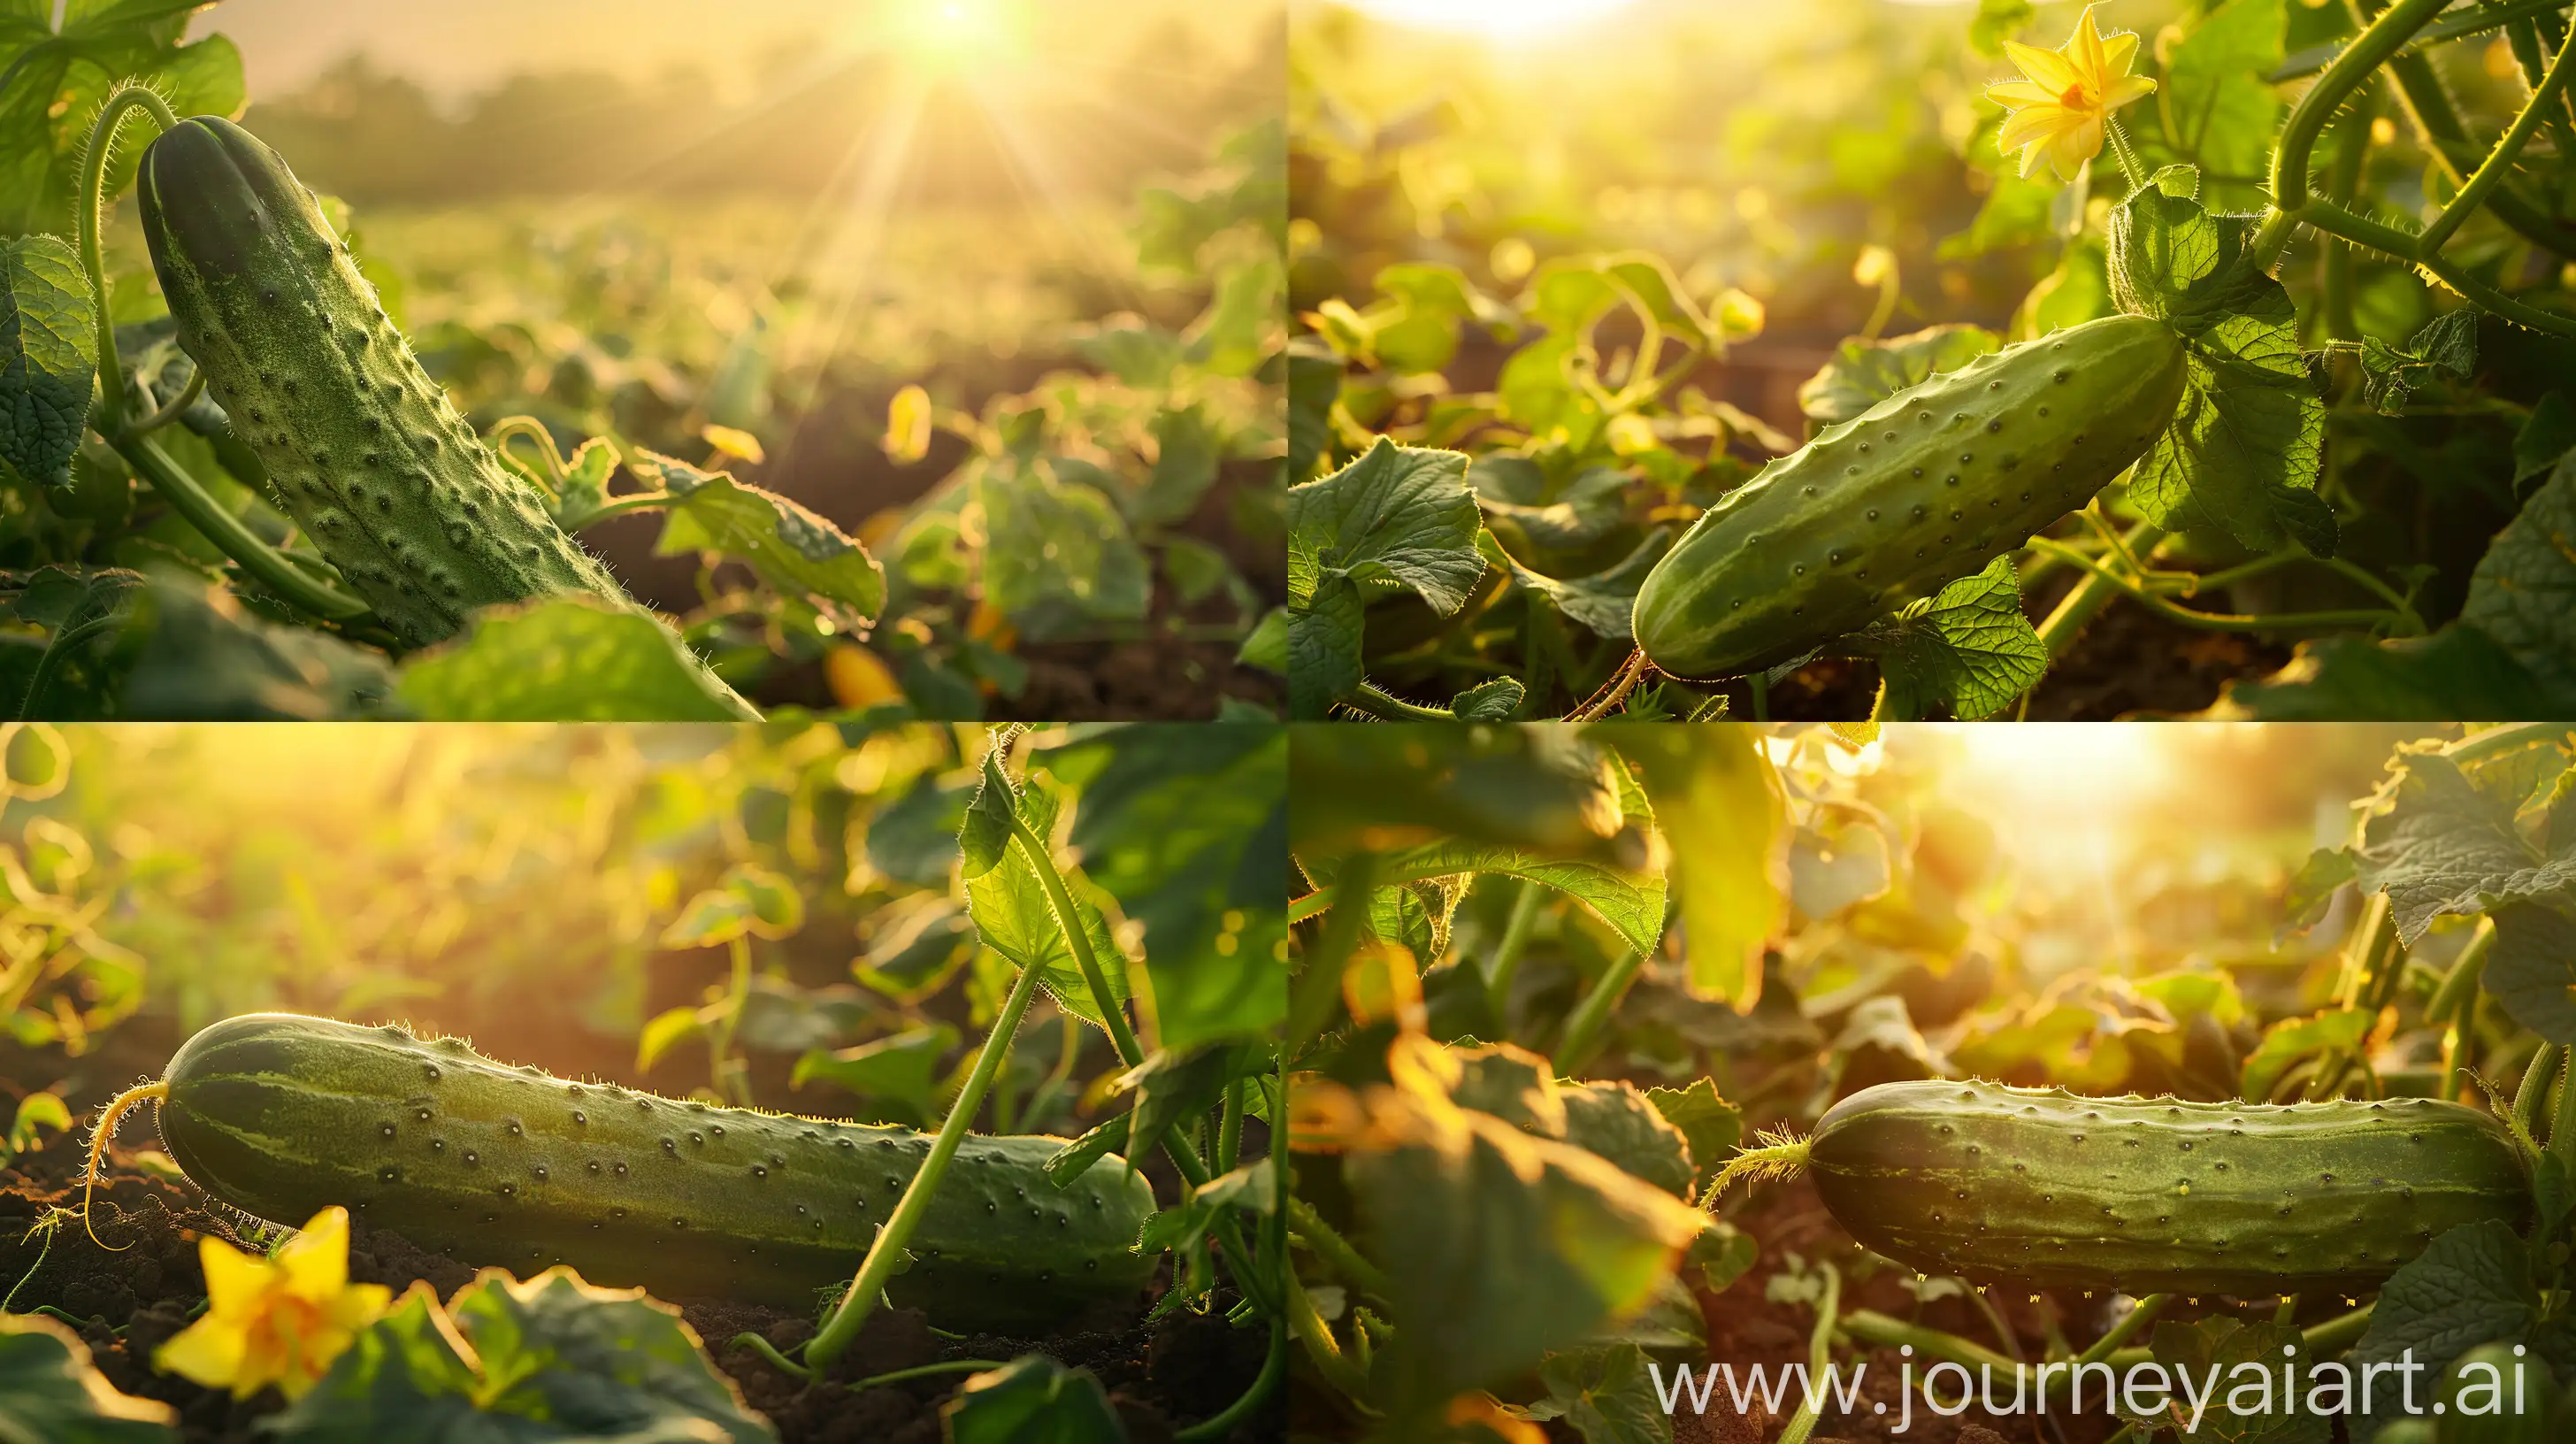 High detailed photo capturing a Cucumber, Suyo Long. The sun, casting a warm, golden glow, bathes the scene in a serene ambiance, illuminating the intricate details of each element. The composition centers on a Cucumber, Suyo Long. Suyo Long is a traditional variety from China that offers an abundance of delicious, burpless, crispy cucumbers. Growing to 16" long on vigorous vines, the sweet ribbed fruits can be picked at any stage, from very young to fully mature. Perfect for eating. The image evokes a sense of tranquility and natural beauty, inviting viewers to immerse themselves in the splendor of the landscape. --ar 16:9 